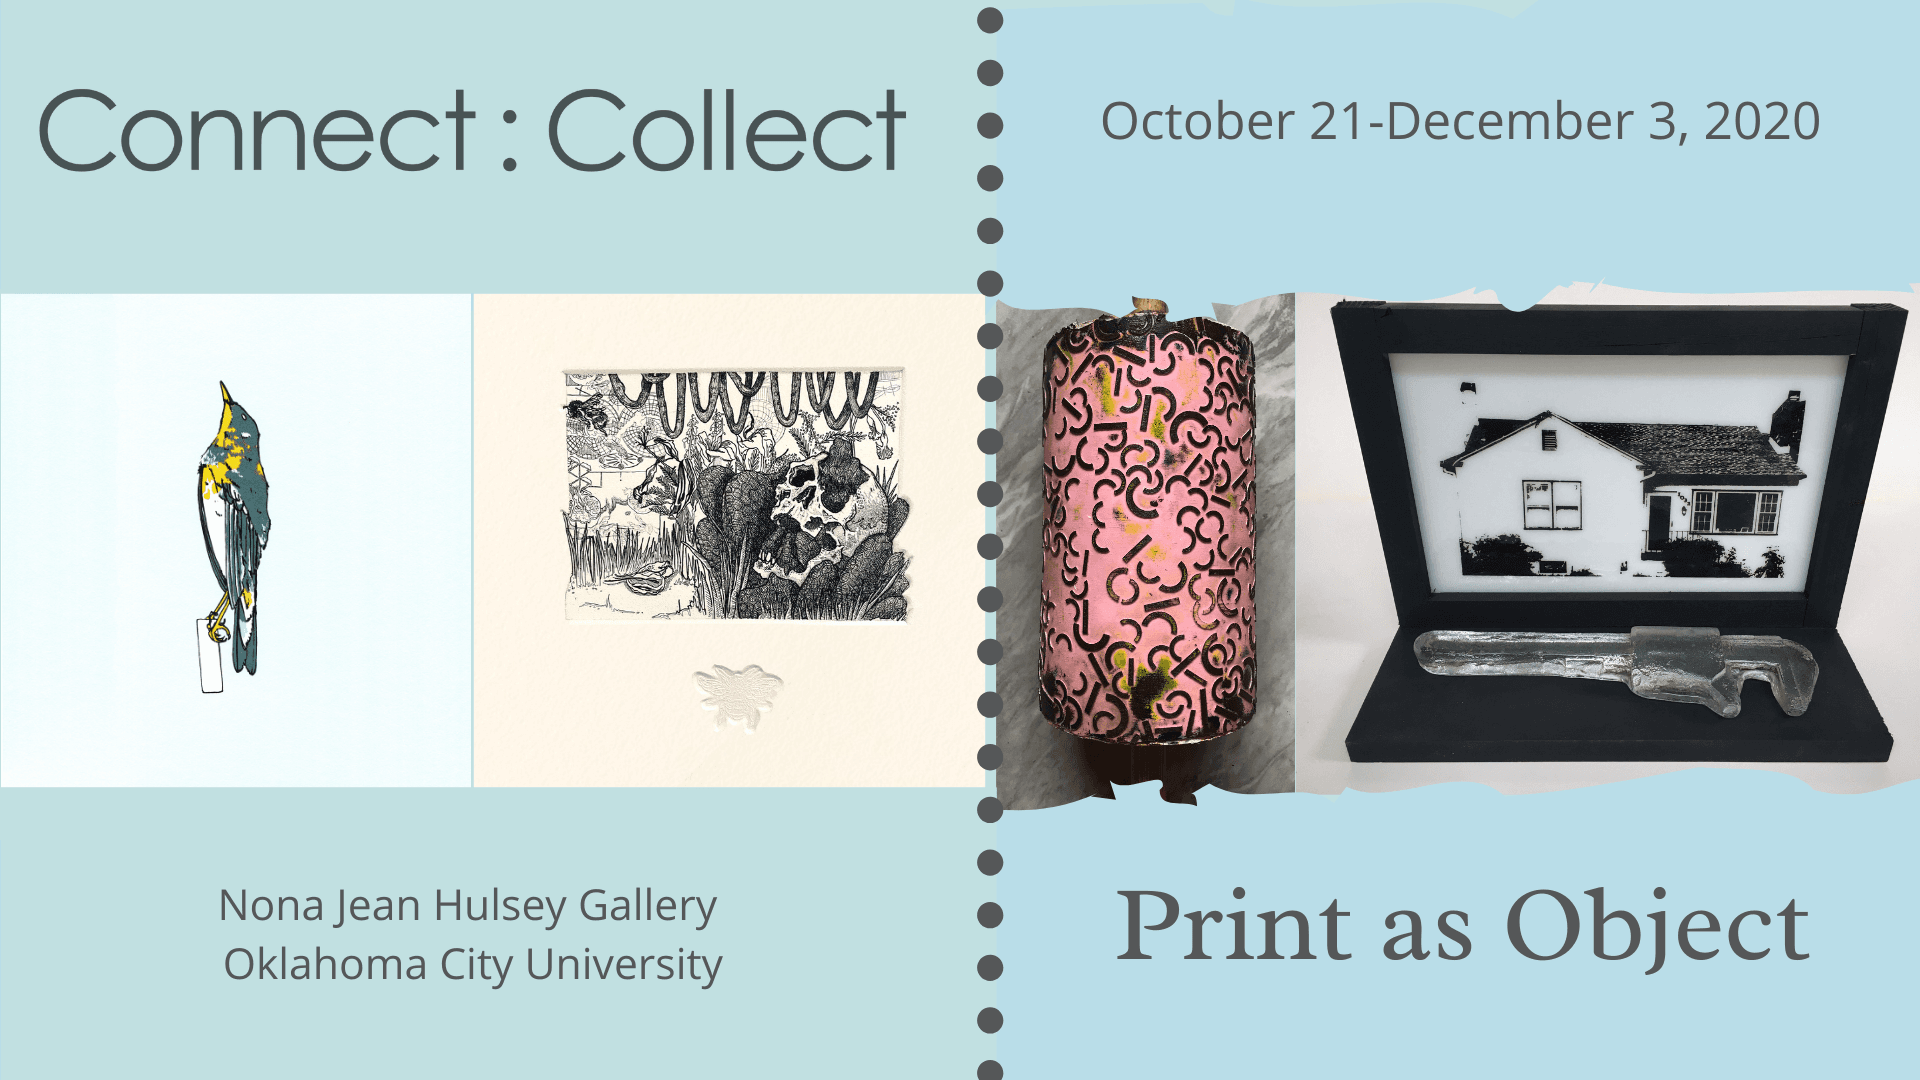 Connect Collect: Print As Object - Nona Jean Hulsey Gallery, Oklahoma City University, October 21st through December 3, 2020